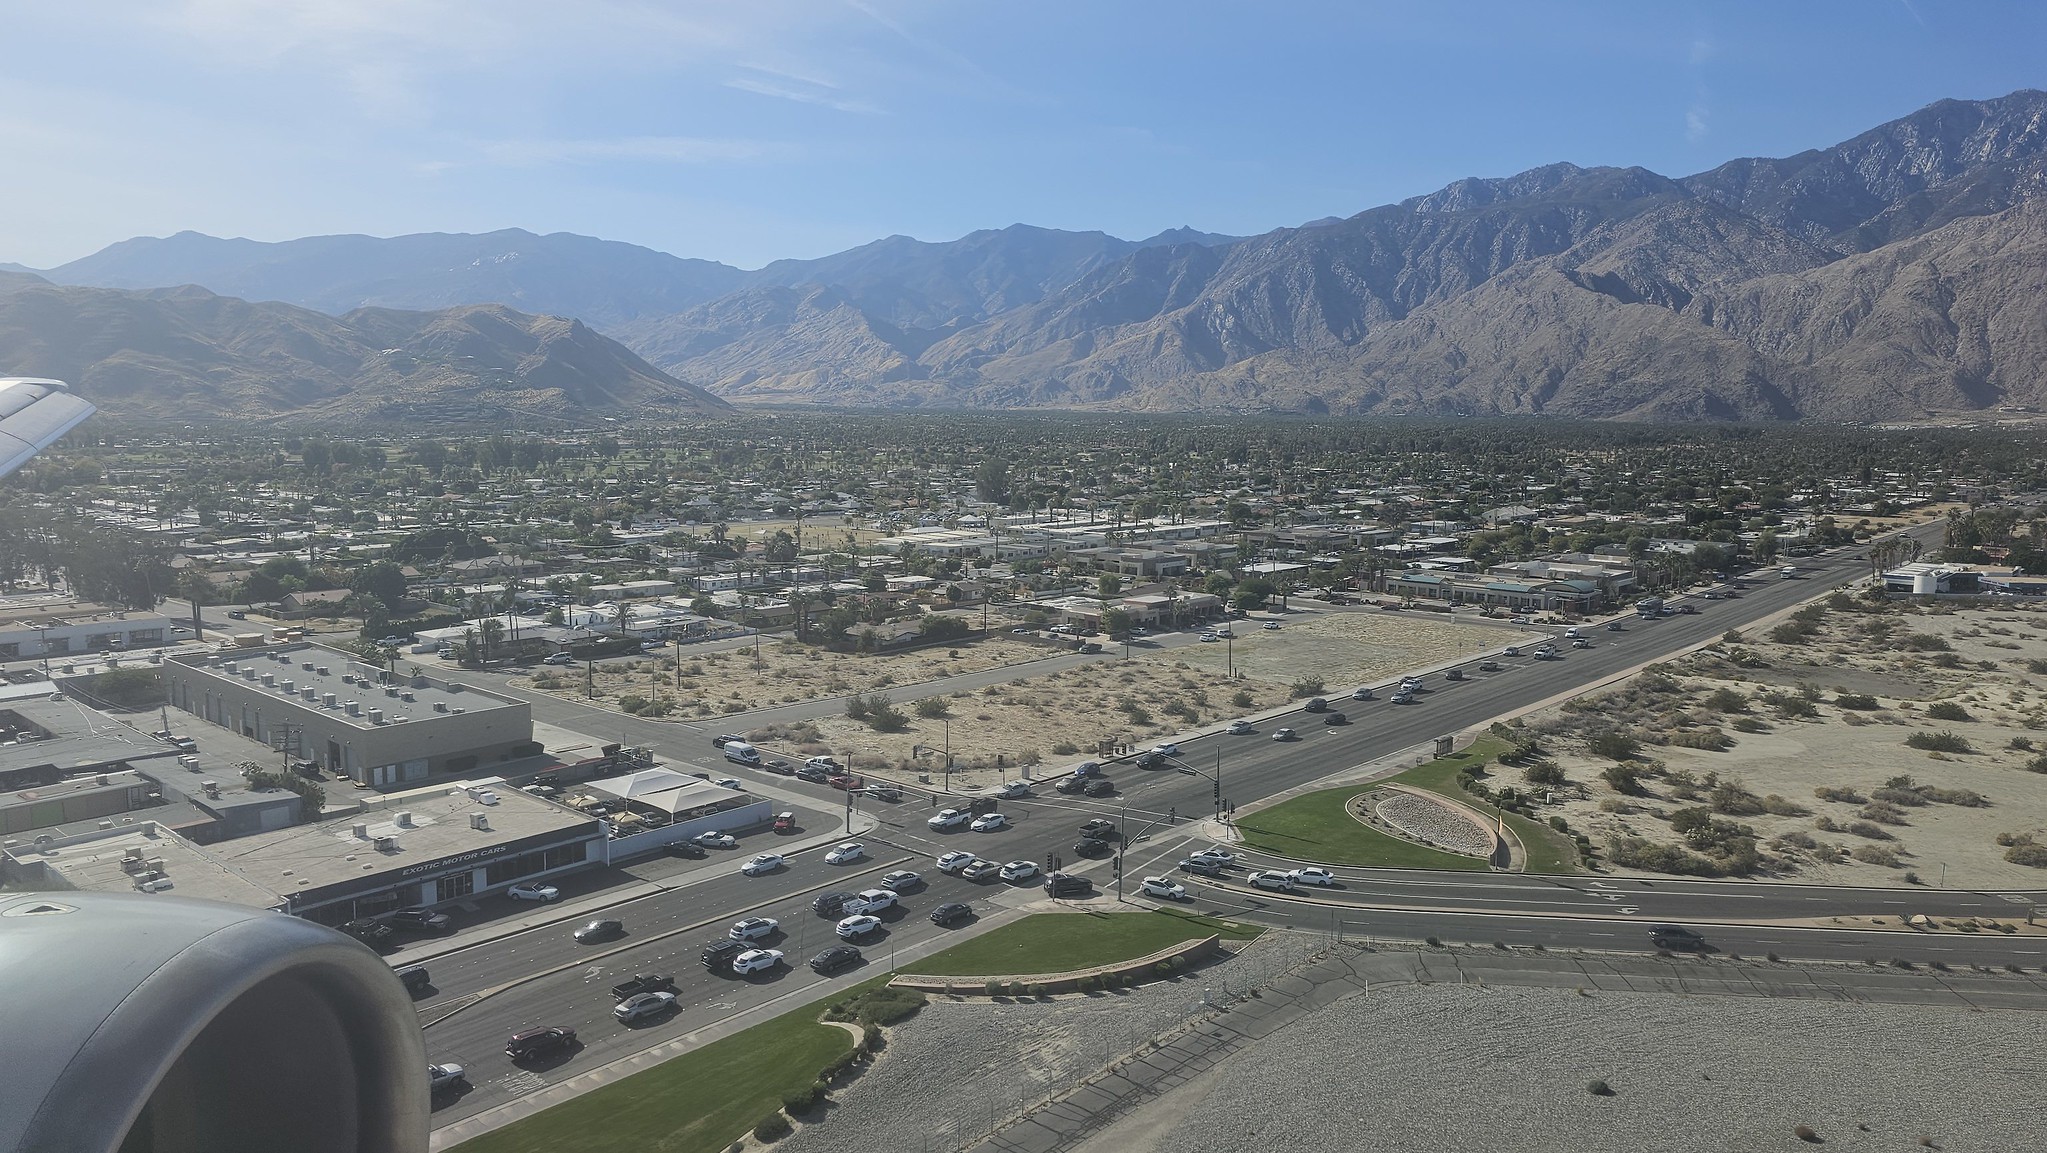 On final approach into Palm Springs